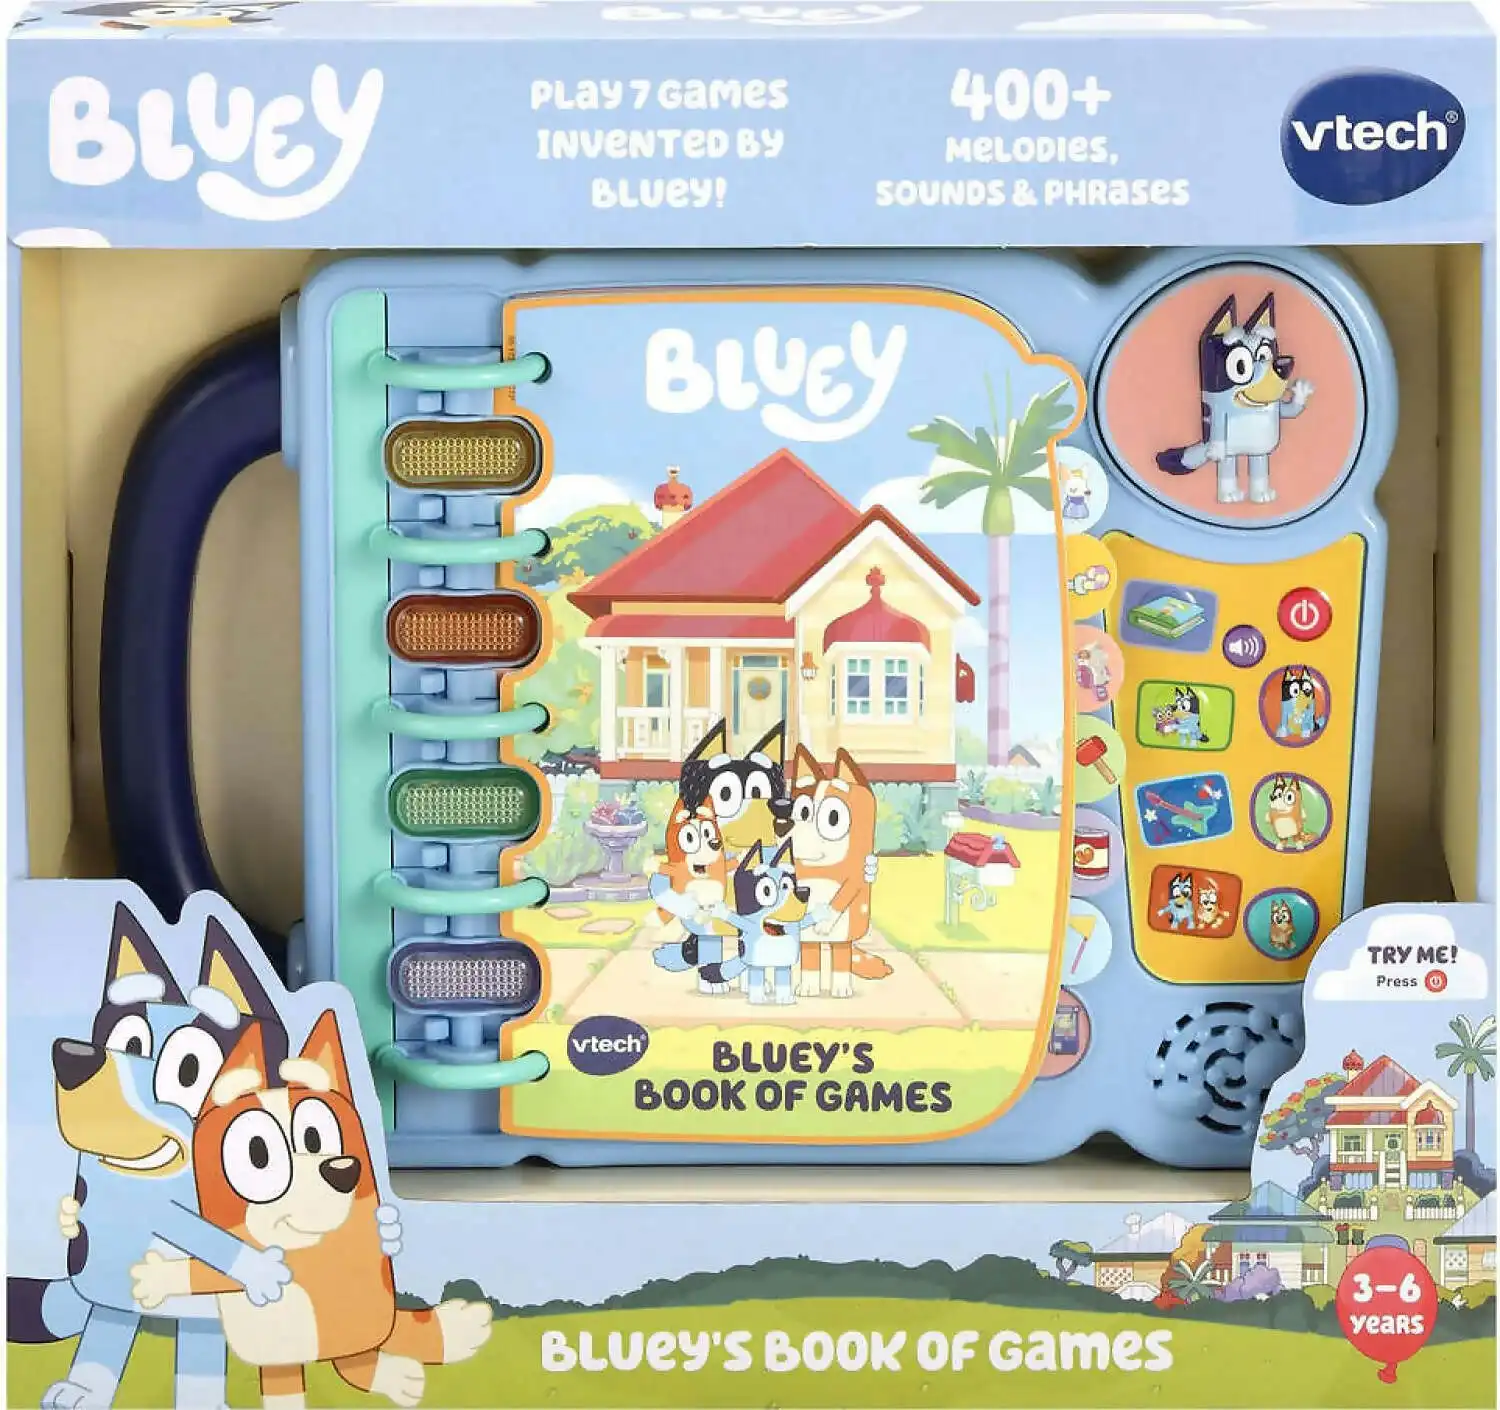 Vtech - Bluey's Book Of Games